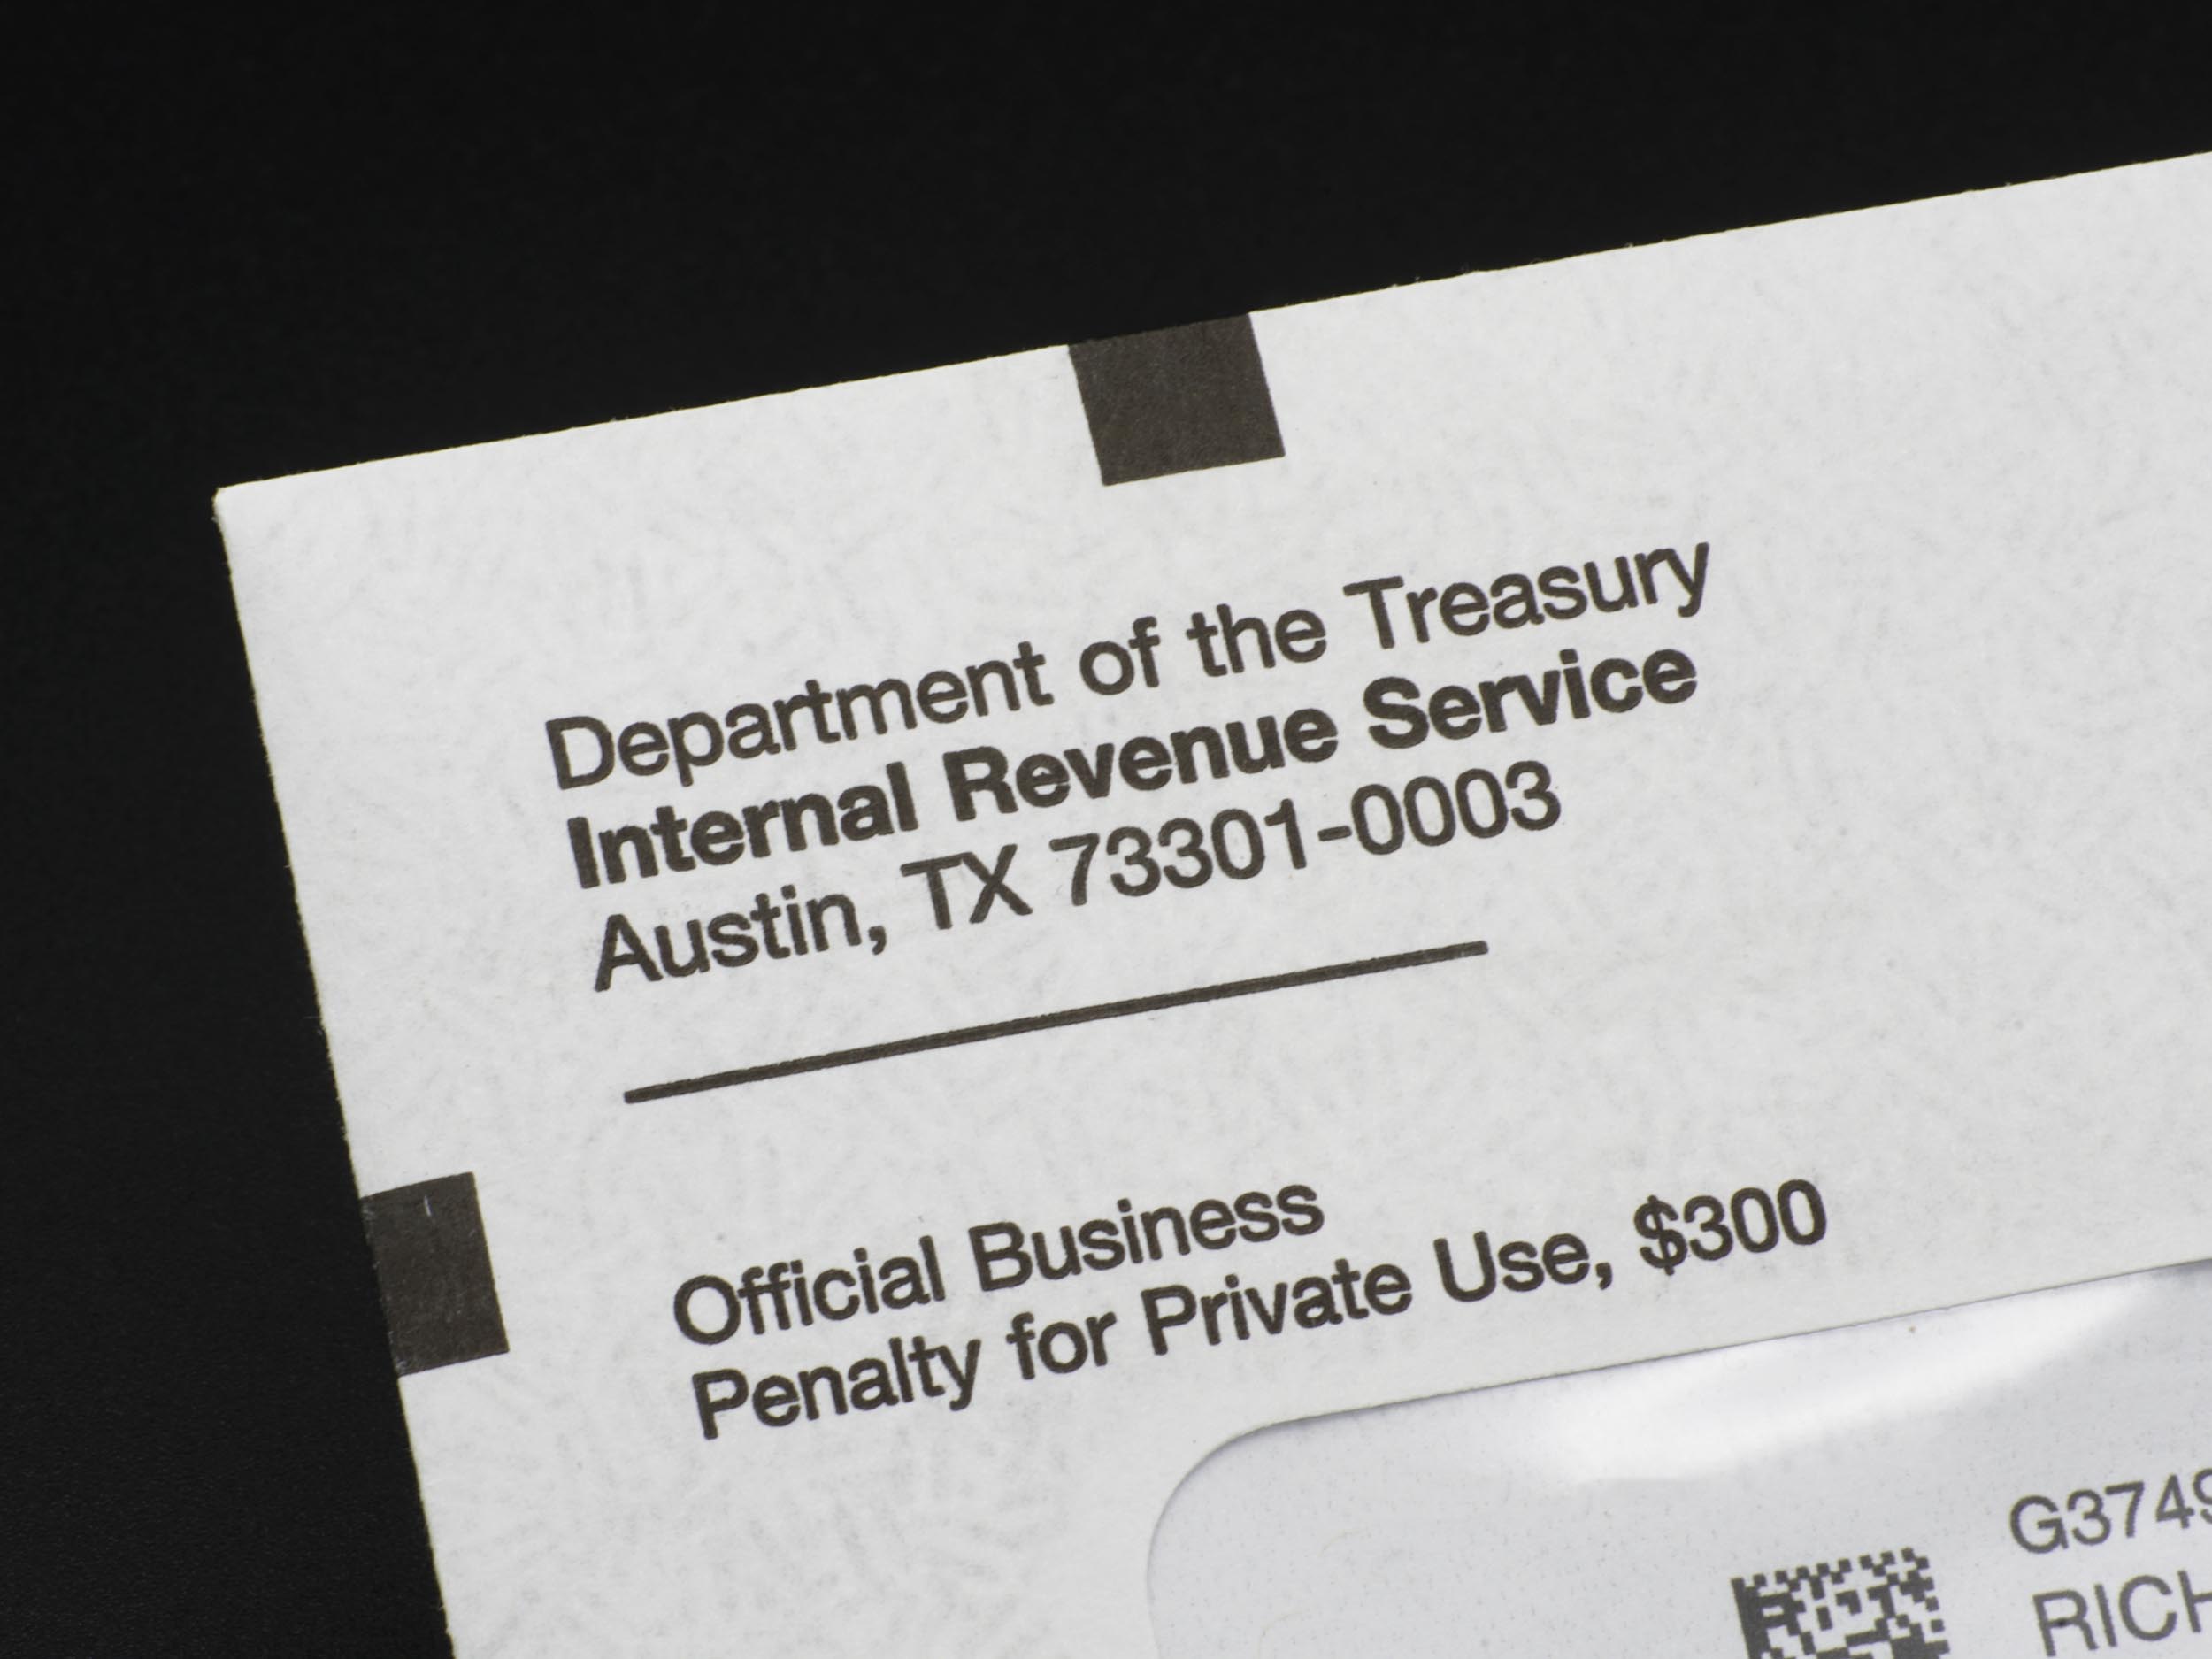 Letterhead from the IRS on black background